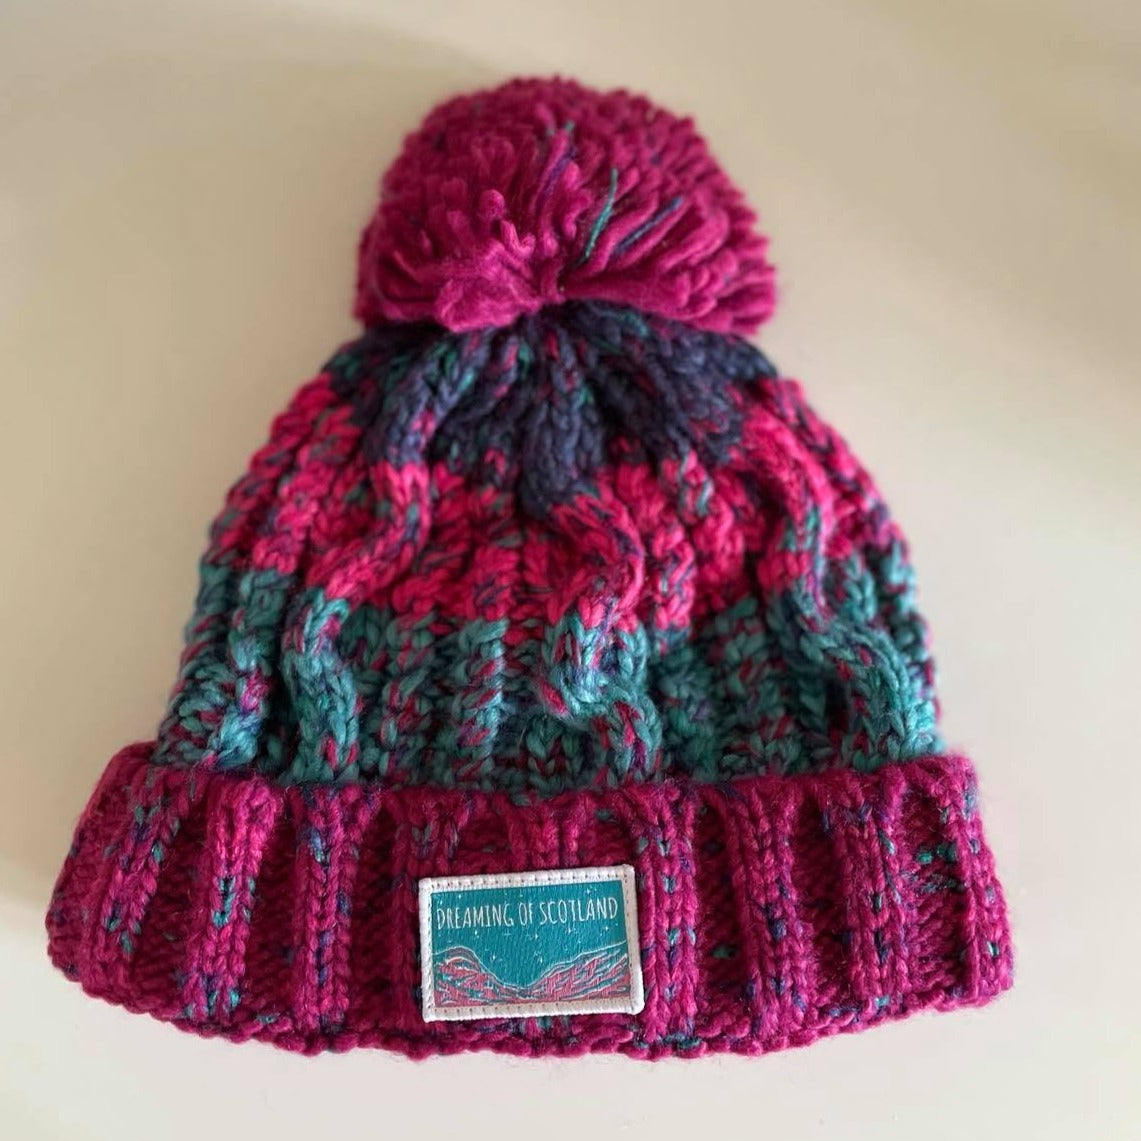 Dreaming of Scotland Junior Beanie in Pink + Blue